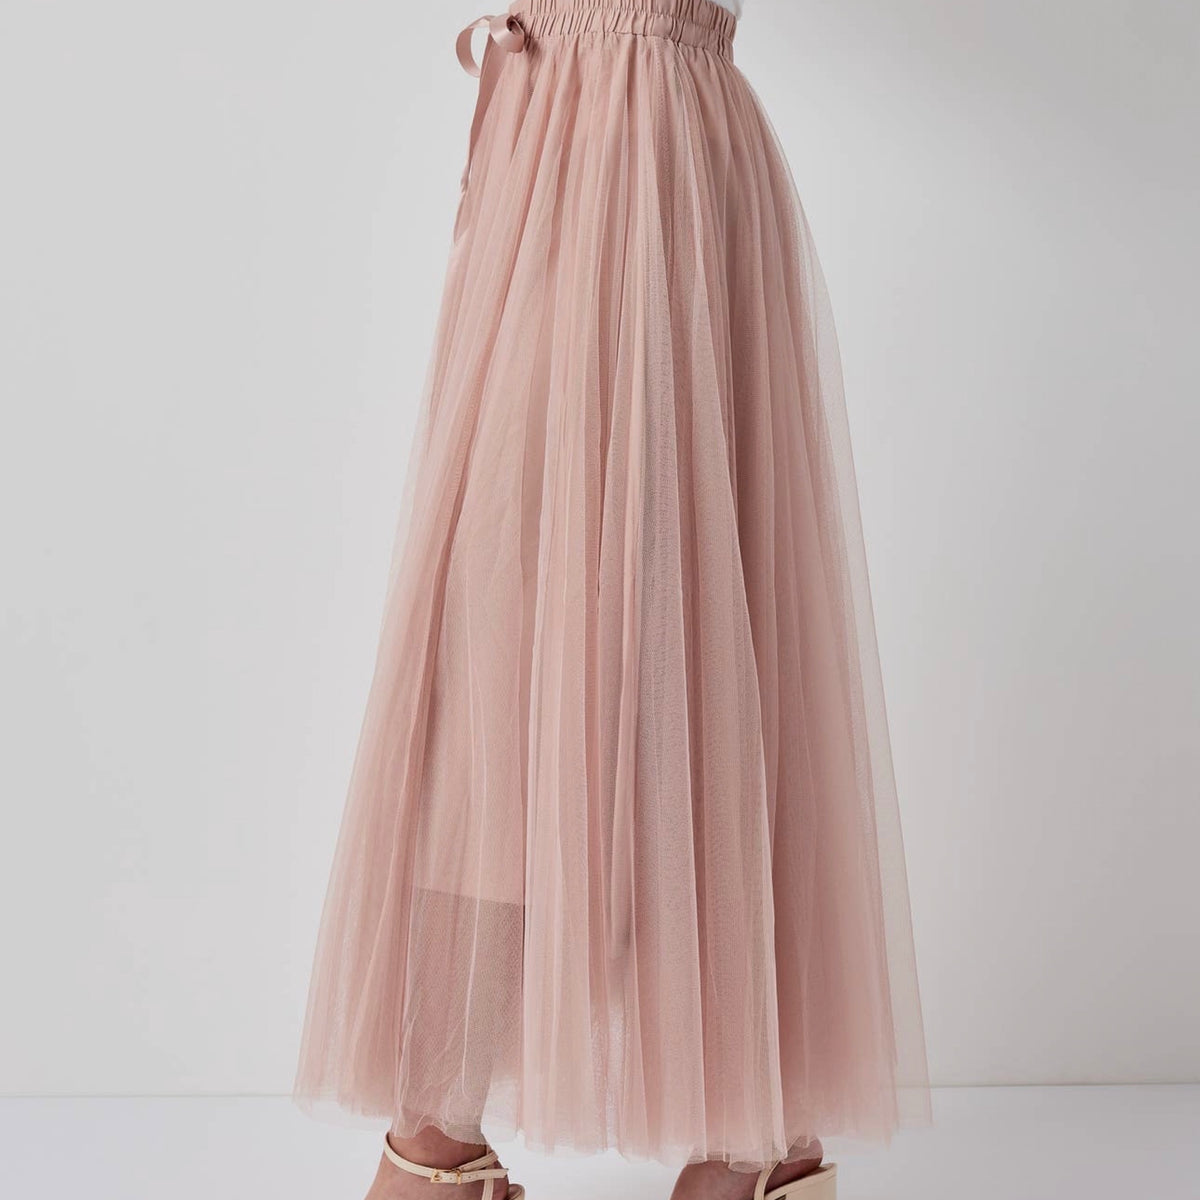 Aria Tulle Skirt Old Rose